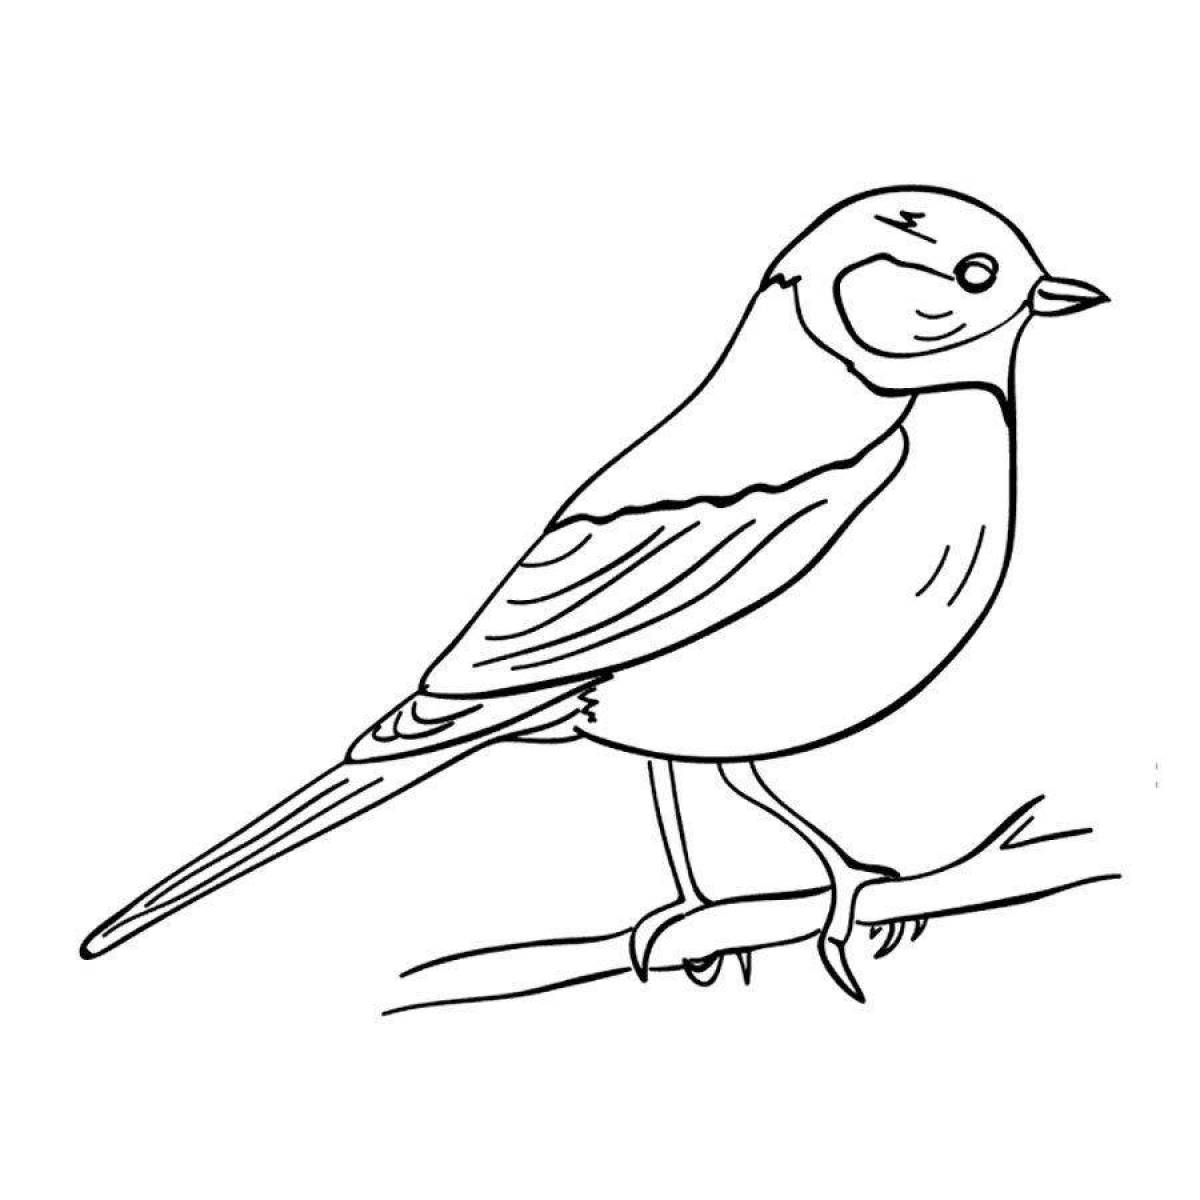 Fantastic tit coloring book for 4-5 year olds